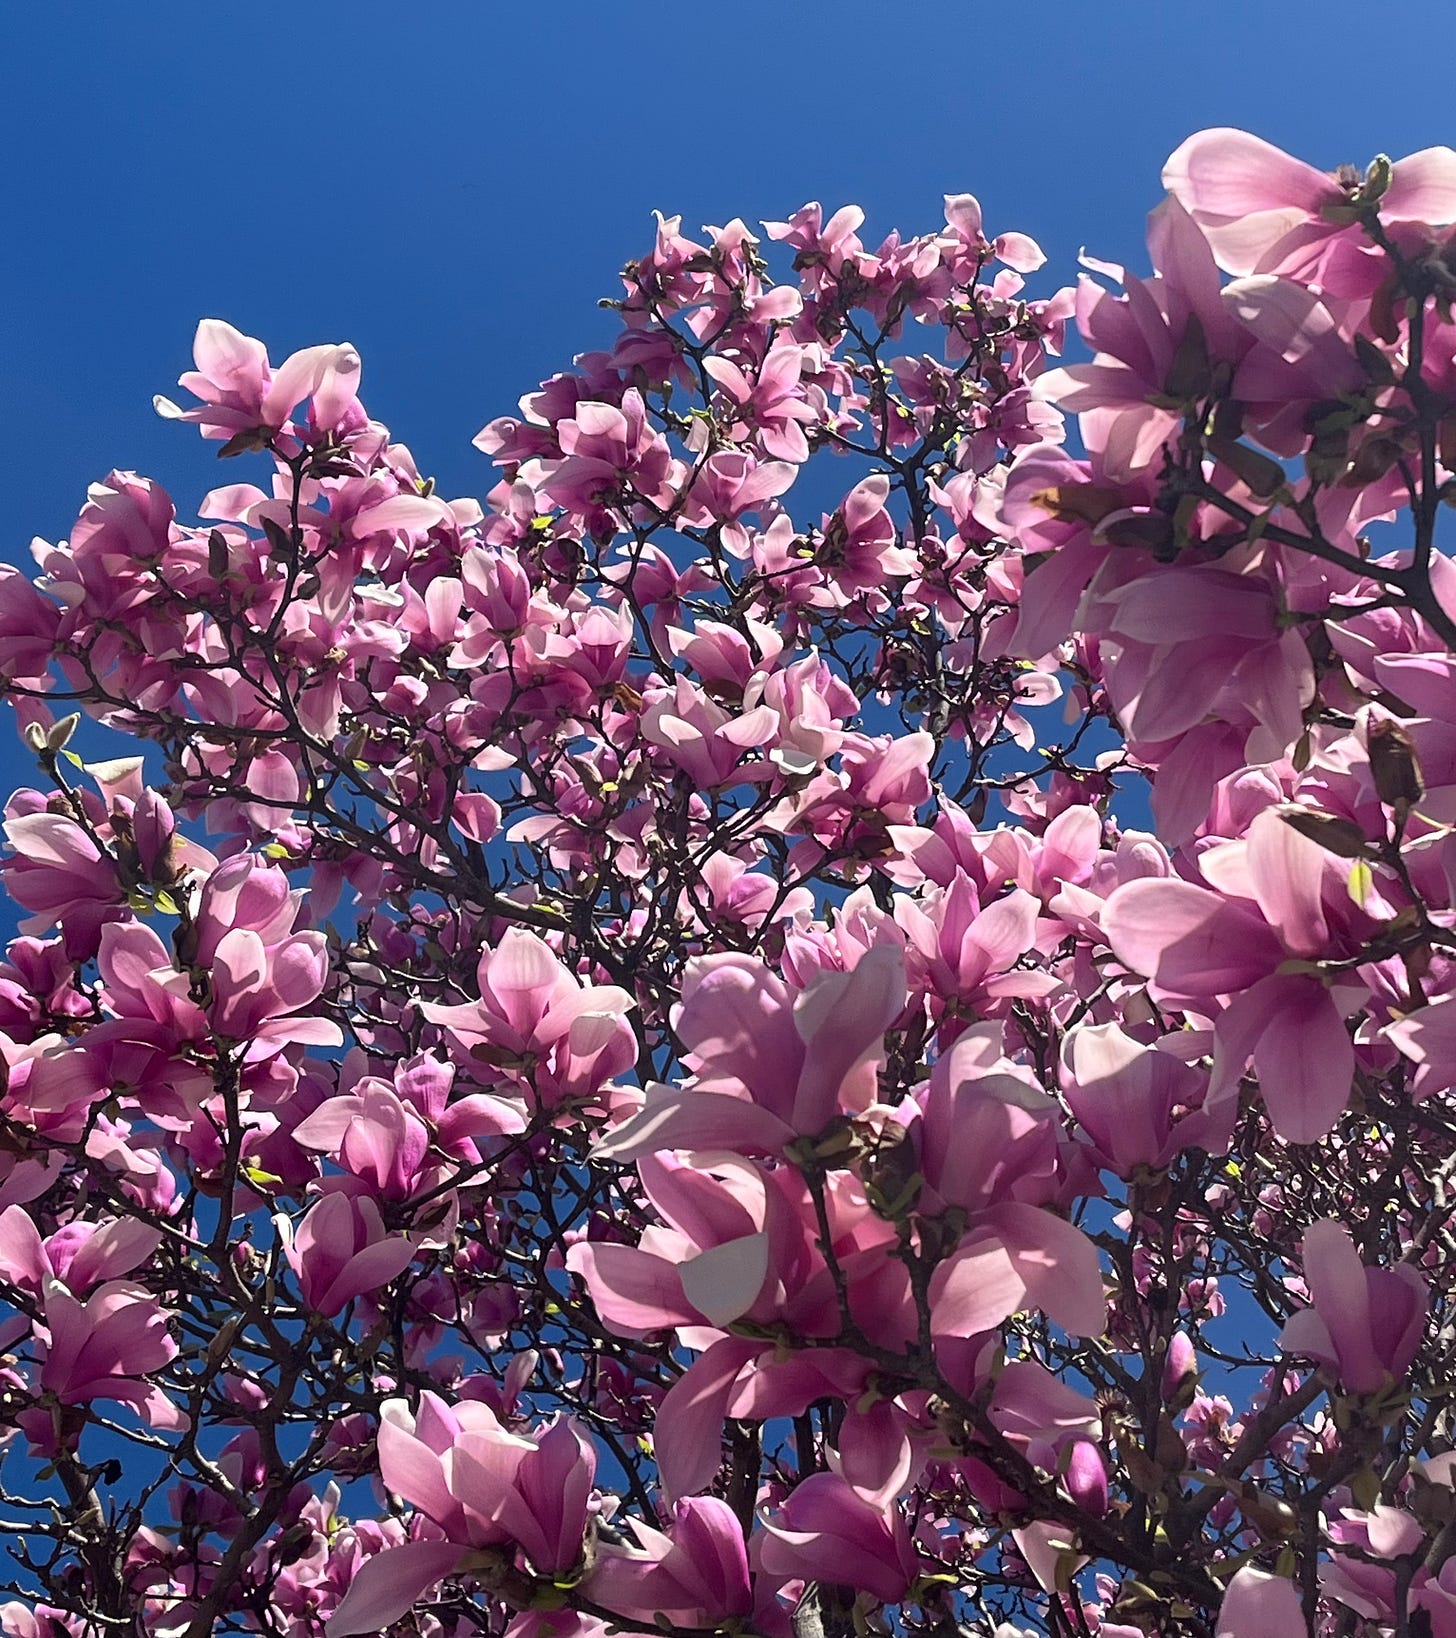 A photo of lots of pink flowers on a pink magnolia tree, taken from below so a bright blue sky is visible in the background.